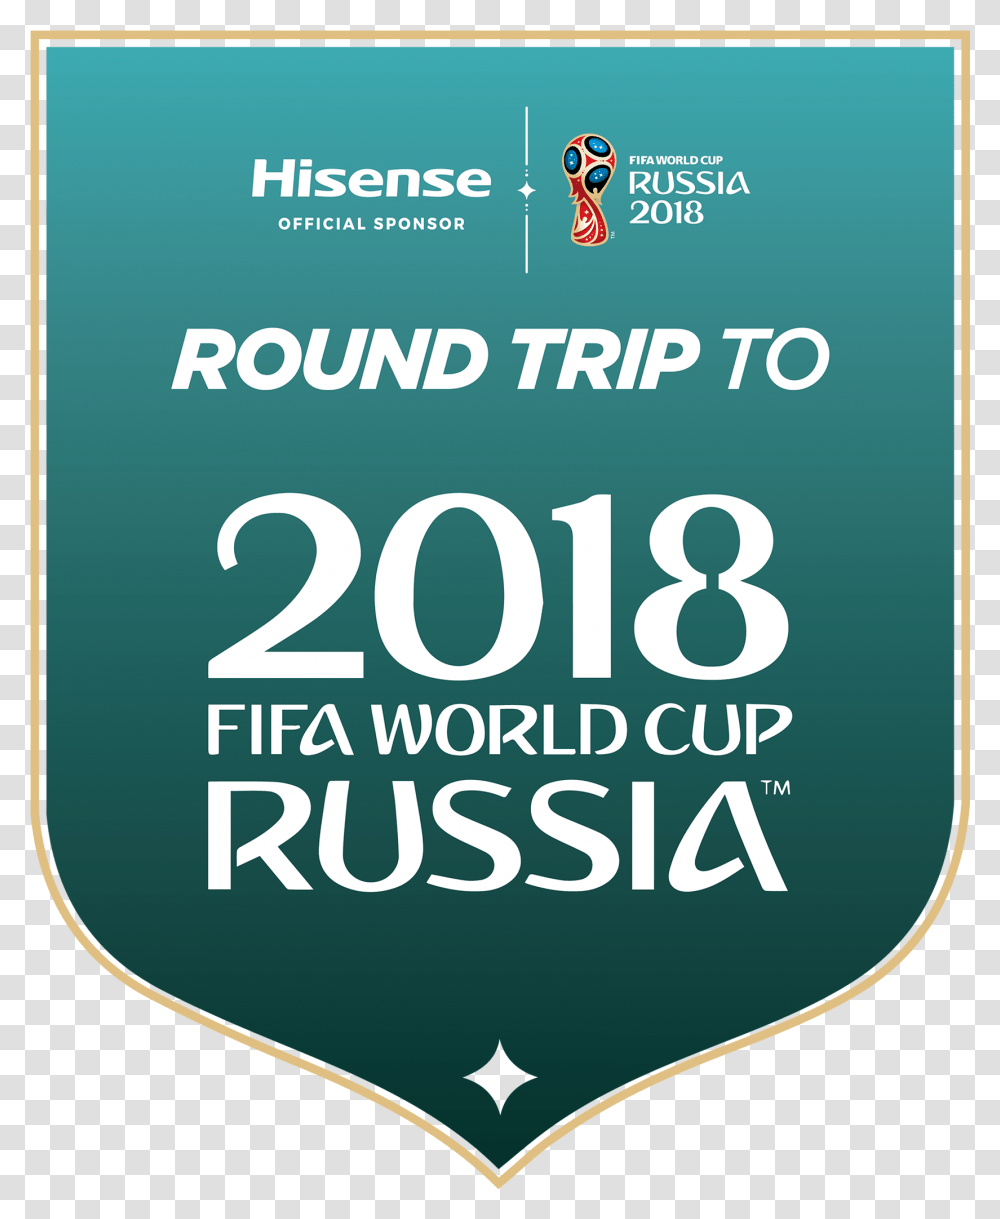 Hisense Round Trip To 2018 Fifa World Cup Russia Poster, Armor, Security, Logo Transparent Png